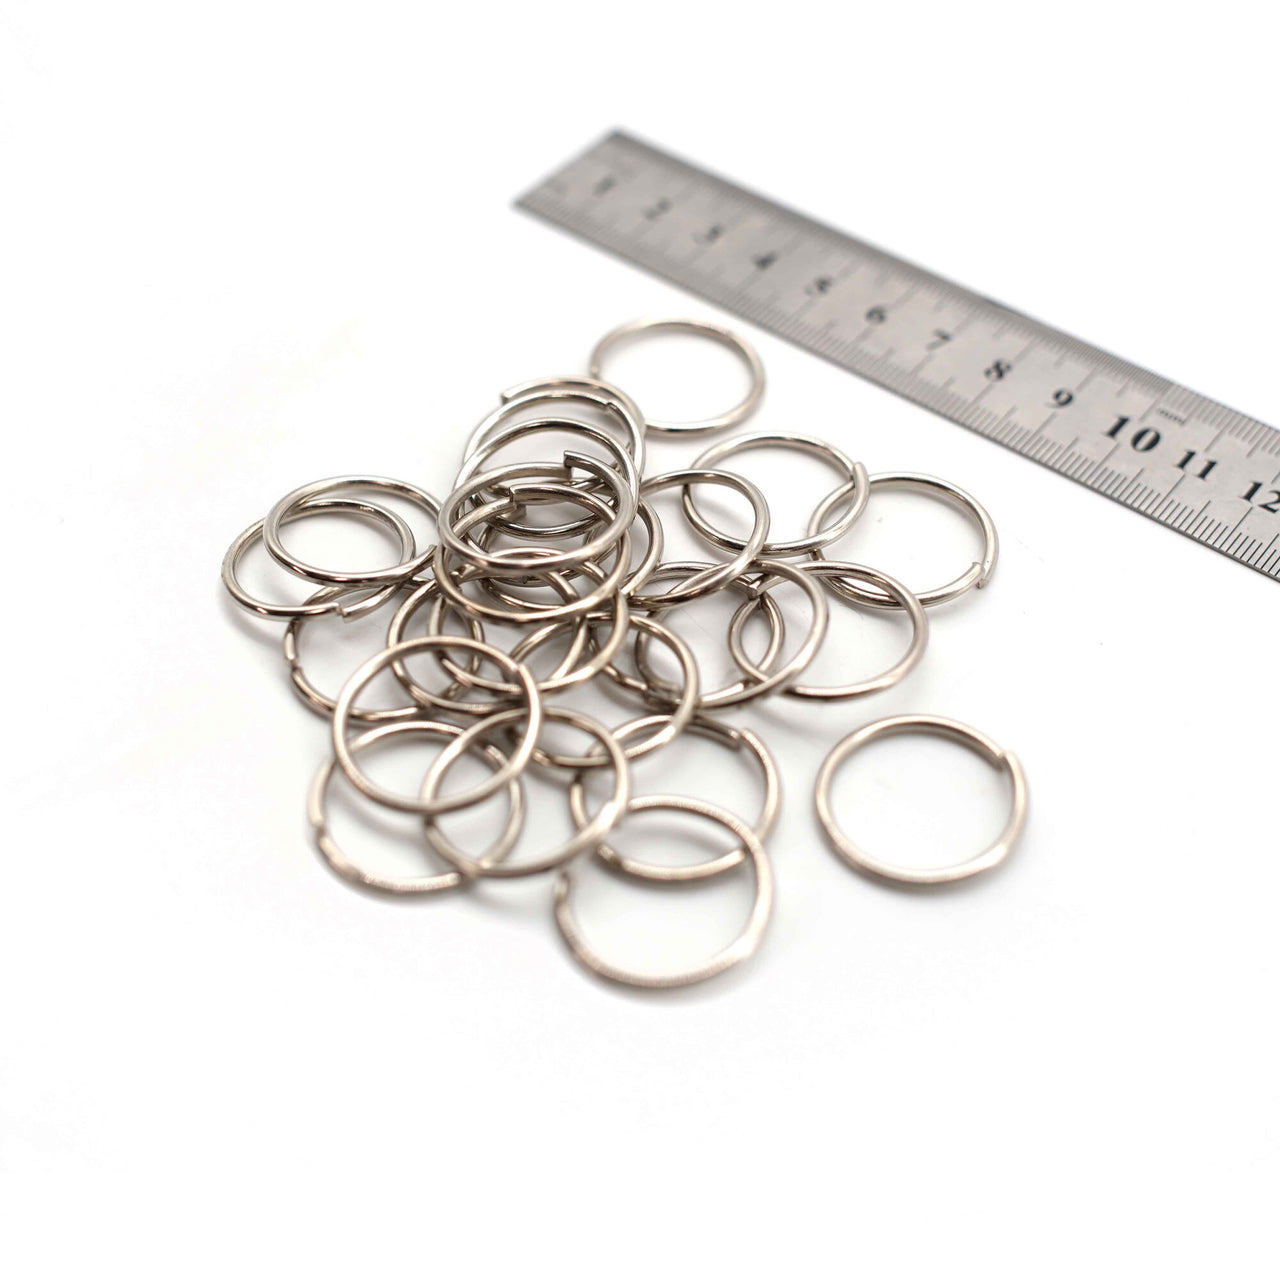 O Rings - 24mm - Silver - Pack of 12